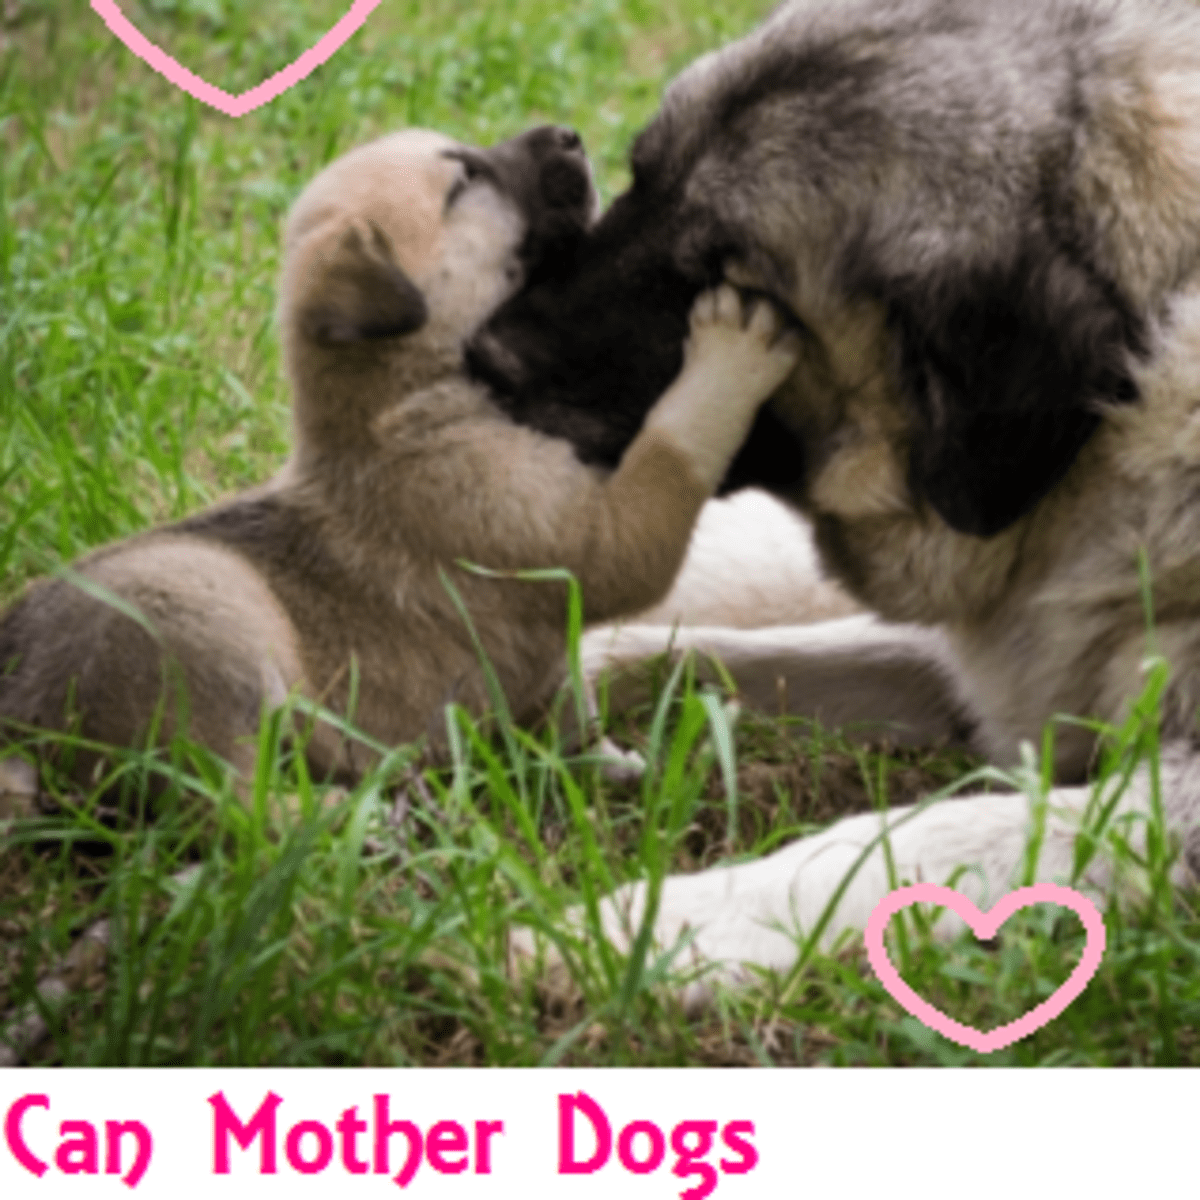 would a dog recognize its mother